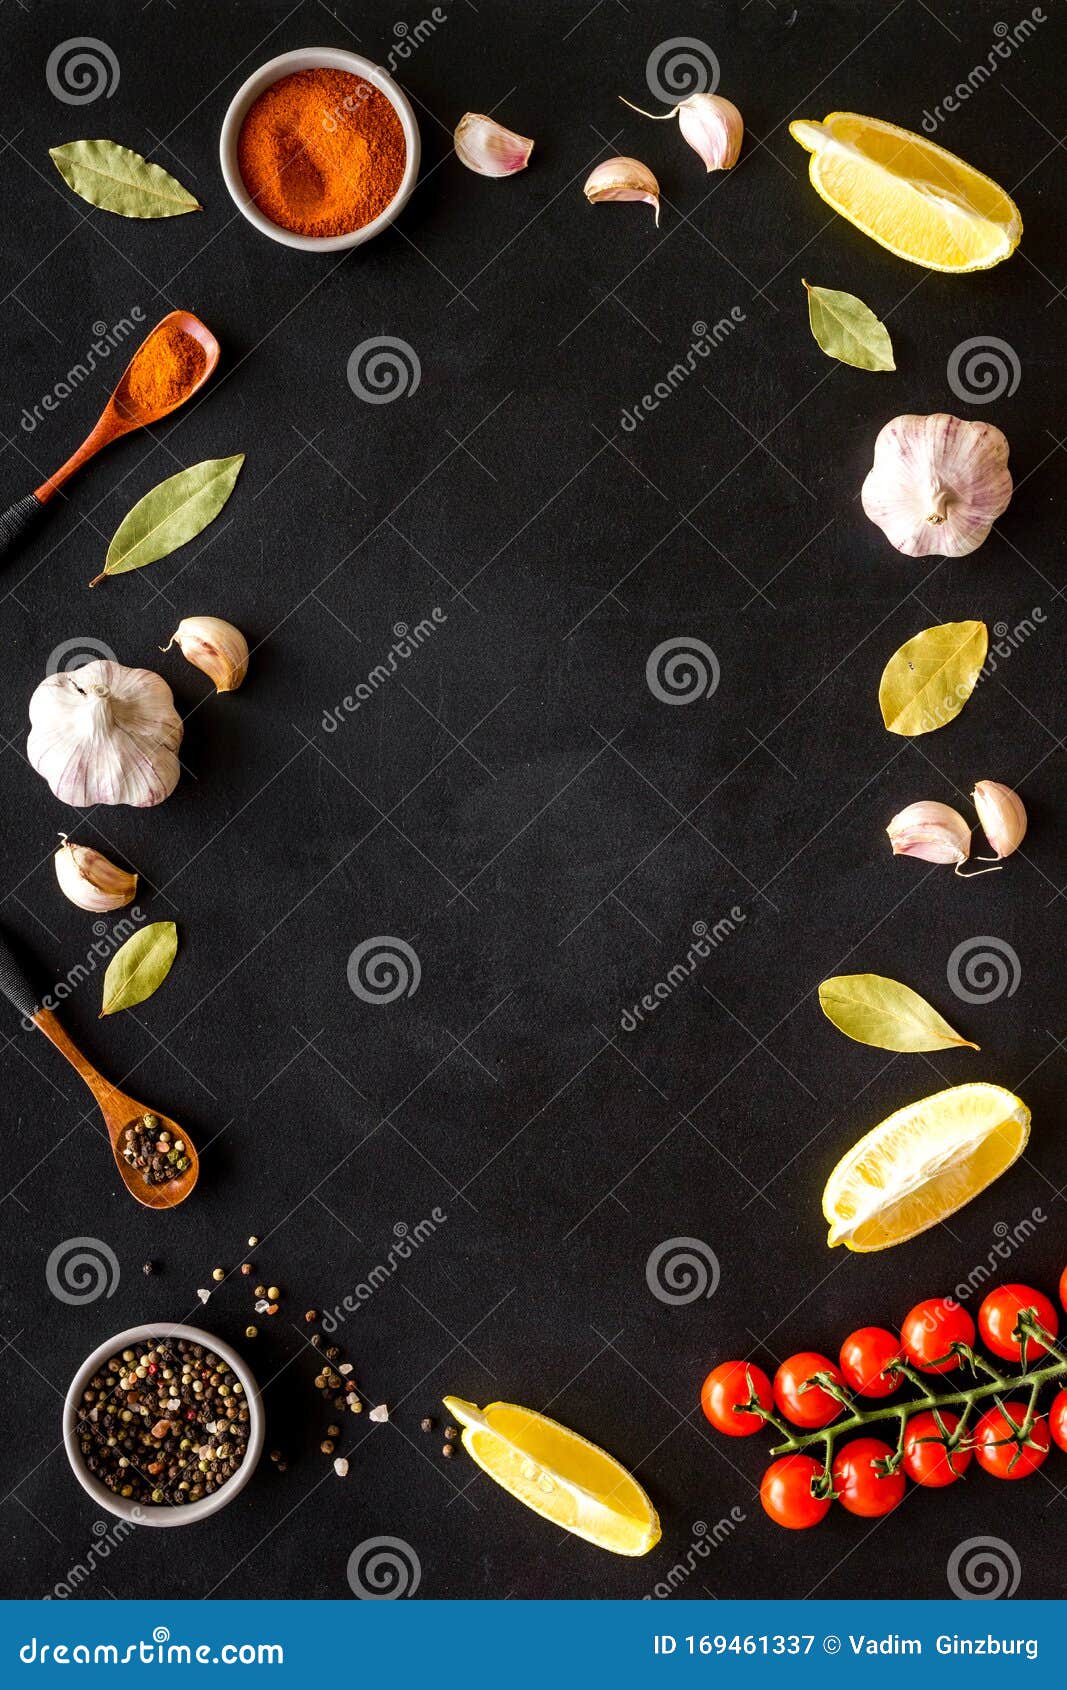 Kitchen Frame with Spices and Food - Pepper, Garlic, Cherry Tomatoes ...